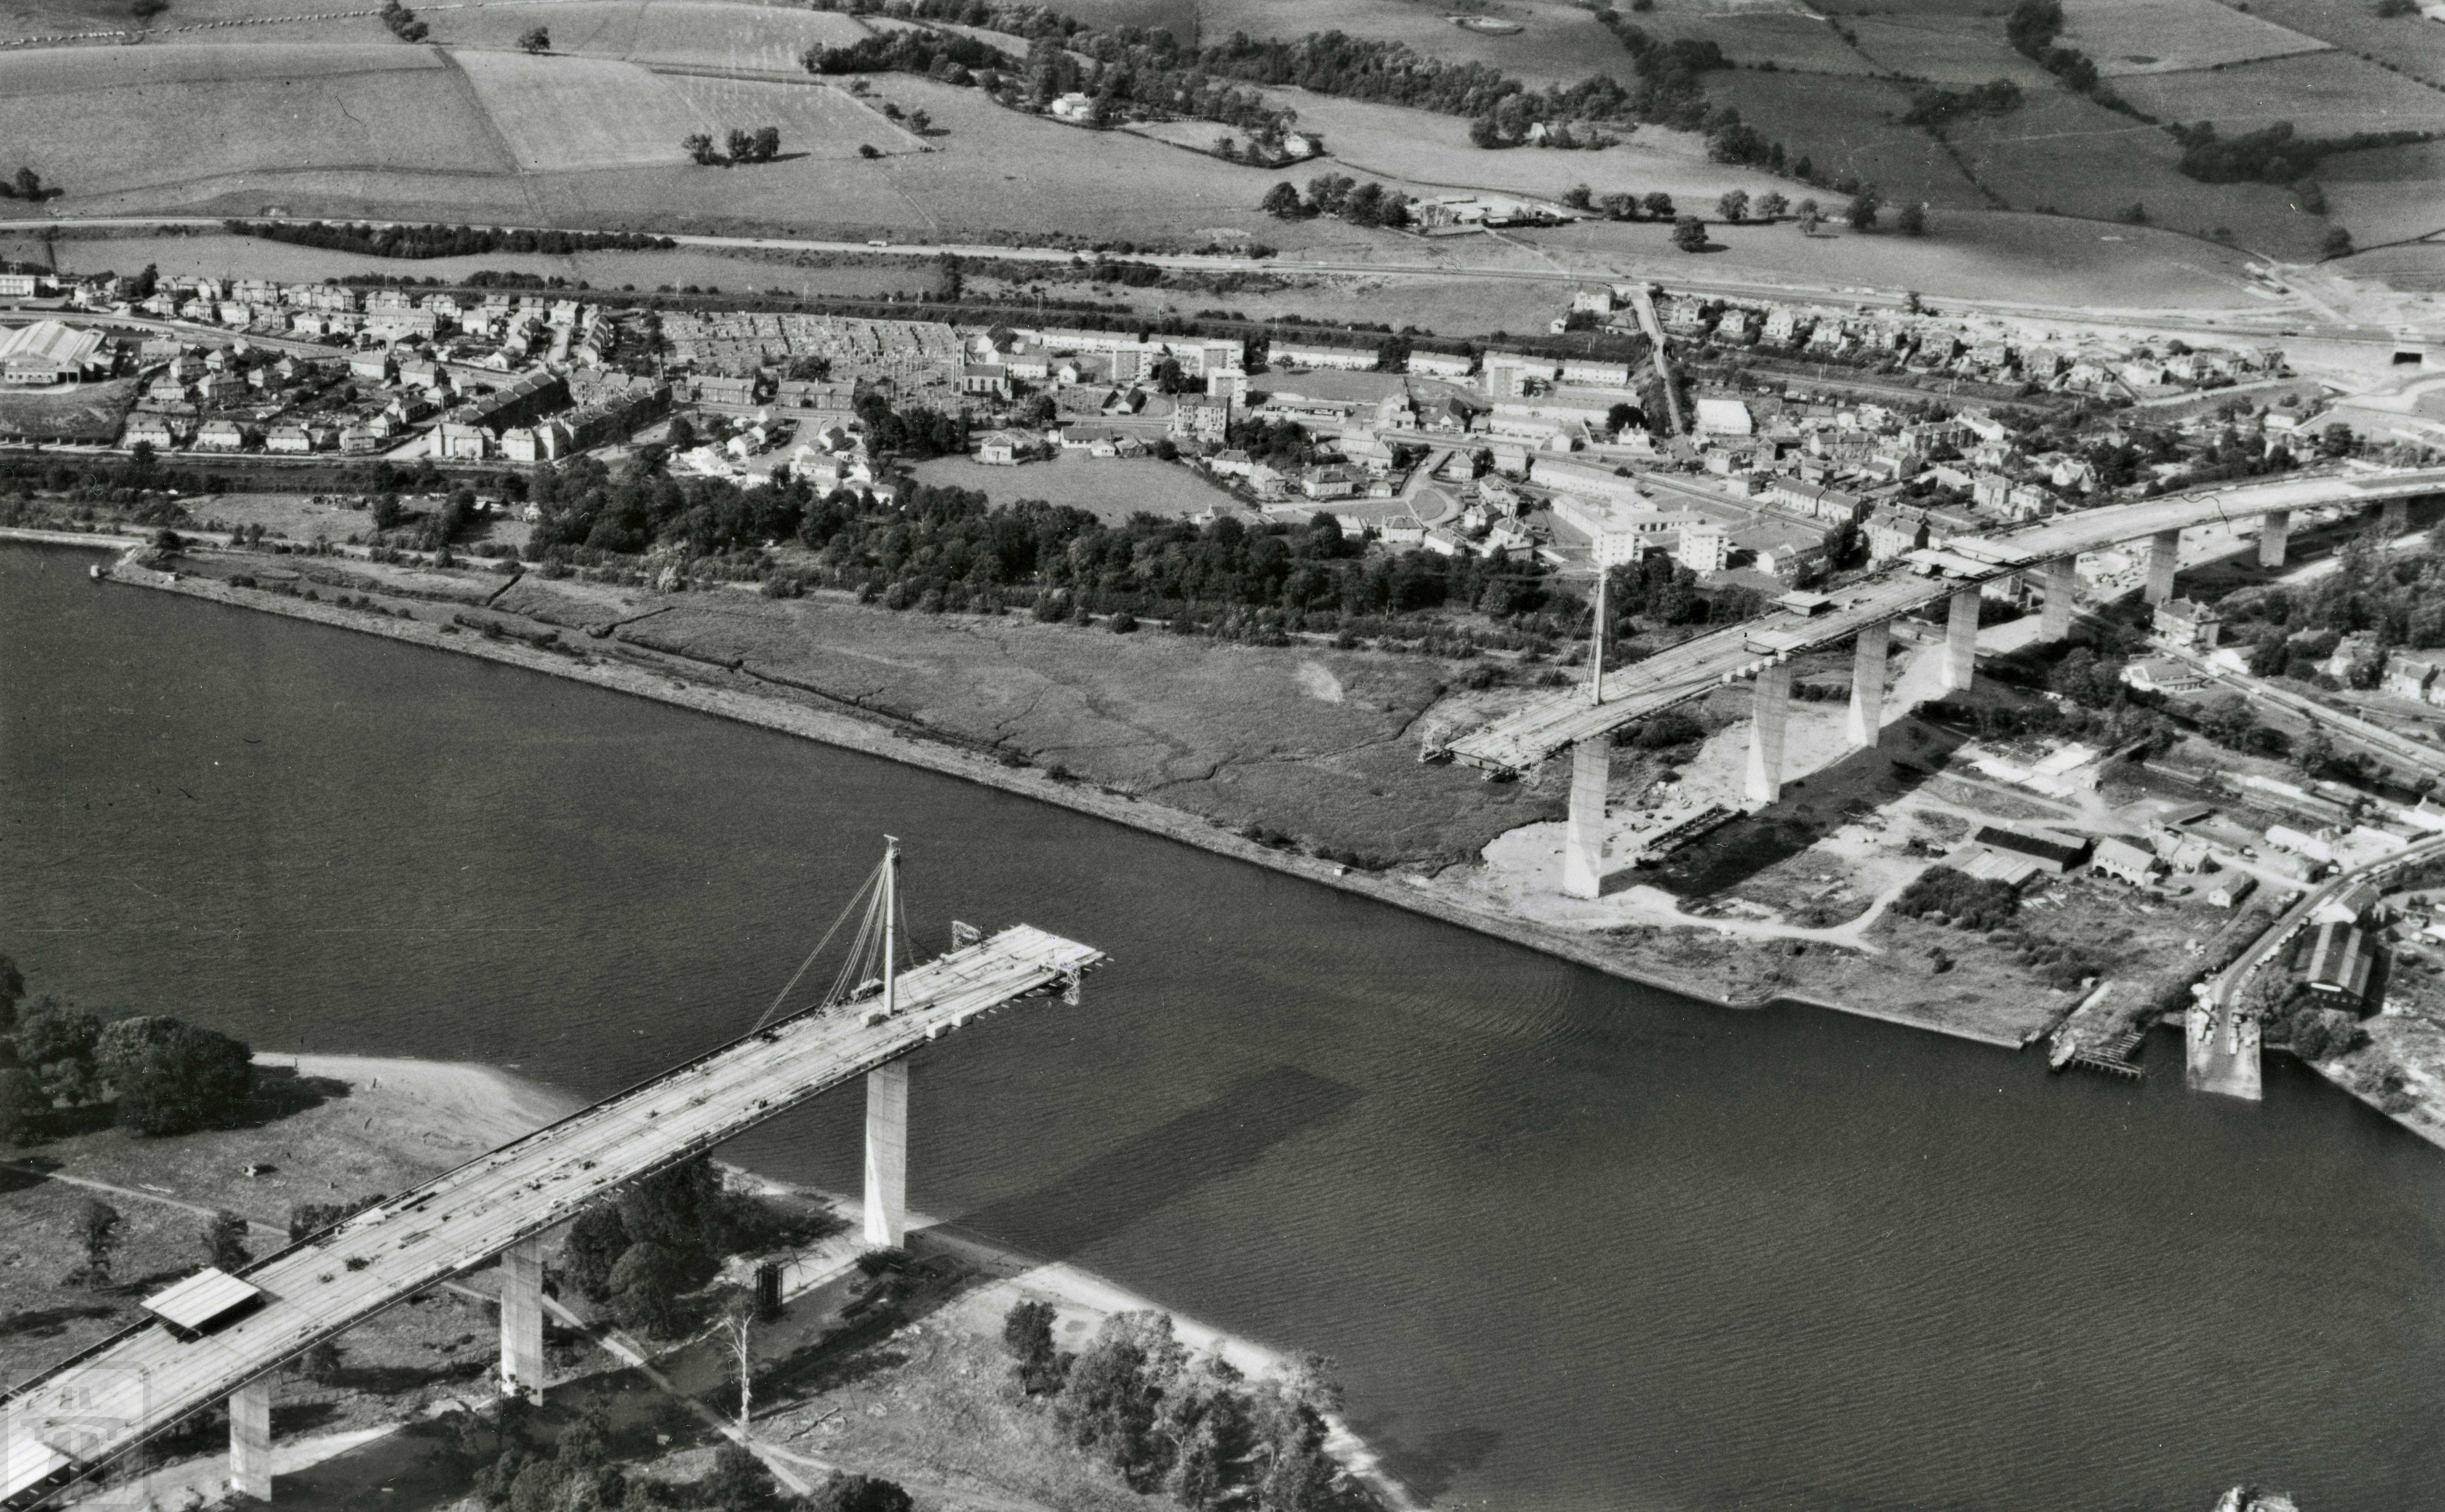 Aerial view of the Erskine Bridge under construction in August 1970 - the gap in the middle is still to be closed.